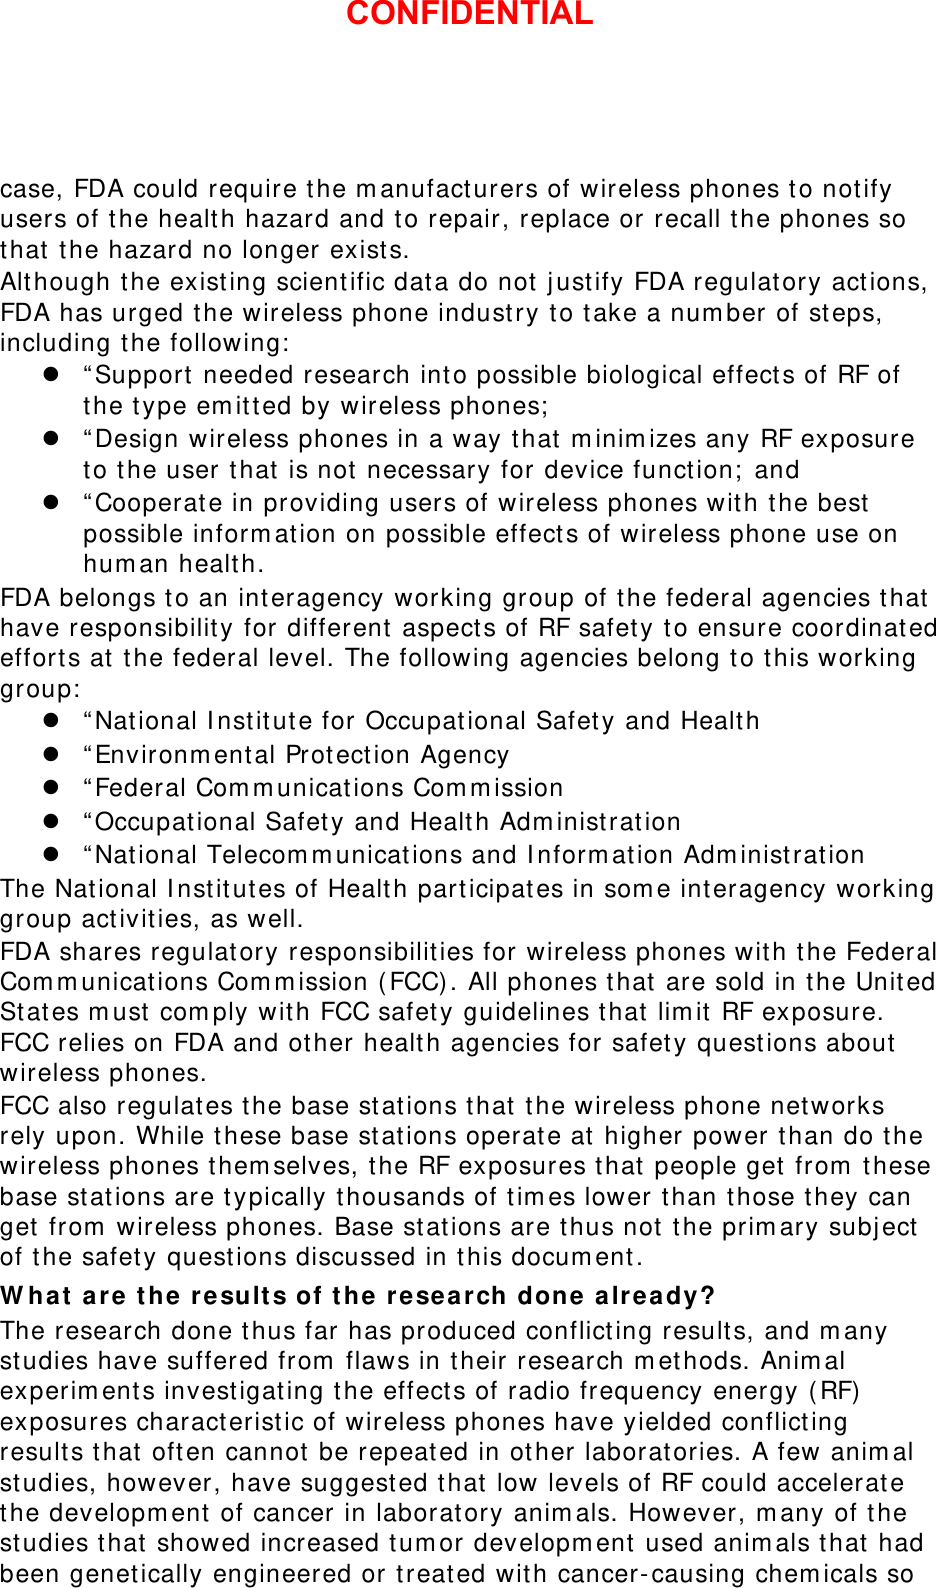 case, FDA could require the manufacturers of wireless phones to notify users of the health hazard and to repair, replace or recall the phones so that the hazard no longer exists. Although the existing scientific data do not justify FDA regulatory actions, FDA has urged the wireless phone industry to take a number of steps, including the following: z “Support needed research into possible biological effects of RF of the type emitted by wireless phones; z “Design wireless phones in a way that minimizes any RF exposure to the user that is not necessary for device function; and z “Cooperate in providing users of wireless phones with the best possible information on possible effects of wireless phone use on human health. FDA belongs to an interagency working group of the federal agencies that have responsibility for different aspects of RF safety to ensure coordinated efforts at the federal level. The following agencies belong to this working group: z “National Institute for Occupational Safety and Health z “Environmental Protection Agency z “Federal Communications Commission z “Occupational Safety and Health Administration z “National Telecommunications and Information Administration The National Institutes of Health participates in some interagency working group activities, as well. FDA shares regulatory responsibilities for wireless phones with the Federal Communications Commission (FCC). All phones that are sold in the United States must comply with FCC safety guidelines that limit RF exposure. FCC relies on FDA and other health agencies for safety questions about wireless phones. FCC also regulates the base stations that the wireless phone networks rely upon. While these base stations operate at higher power than do the wireless phones themselves, the RF exposures that people get from these base stations are typically thousands of times lower than those they can get from wireless phones. Base stations are thus not the primary subject of the safety questions discussed in this document. What are the results of the research done already? The research done thus far has produced conflicting results, and many studies have suffered from flaws in their research methods. Animal experiments investigating the effects of radio frequency energy (RF) exposures characteristic of wireless phones have yielded conflicting results that often cannot be repeated in other laboratories. A few animal studies, however, have suggested that low levels of RF could accelerate the development of cancer in laboratory animals. However, many of the studies that showed increased tumor development used animals that had been genetically engineered or treated with cancer-causing chemicals so CONFIDENTIAL